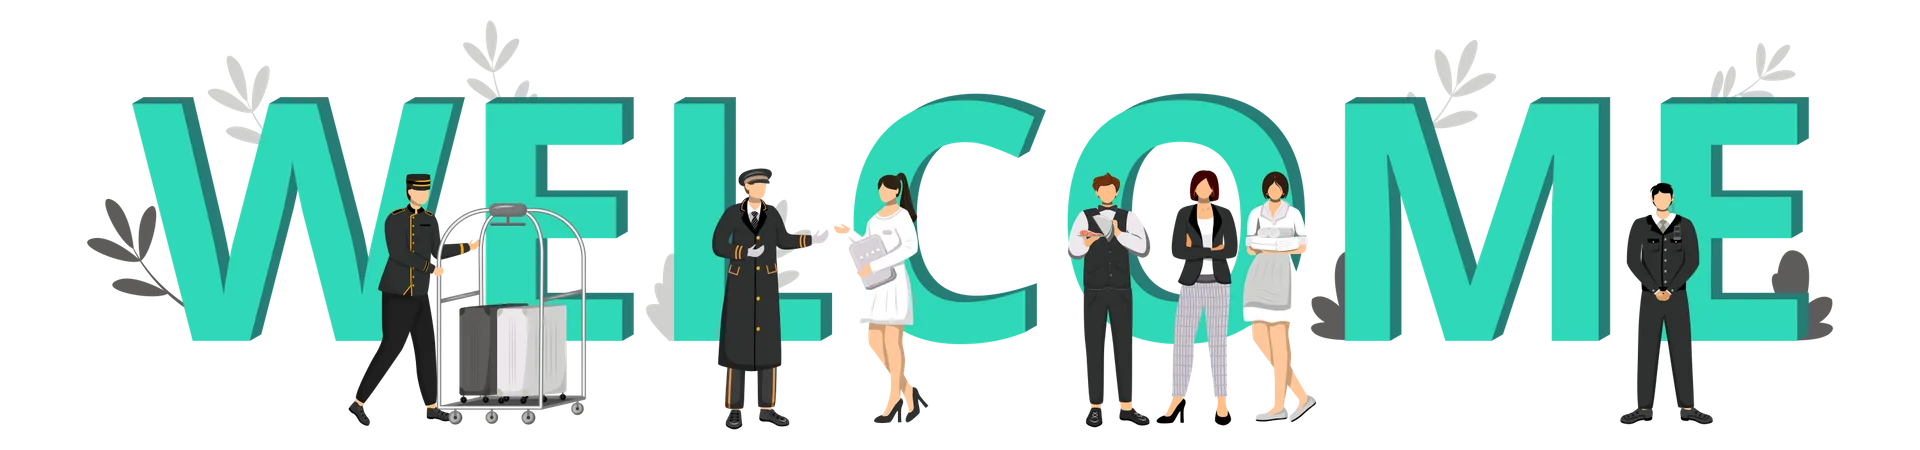 Welcome To Hotel Flat Color Vector Illustration Hospitality Business Accommodation Service Hall Porter Doorman Resort Manager Working Staff Isolated Cartoon Characters On White Illustration